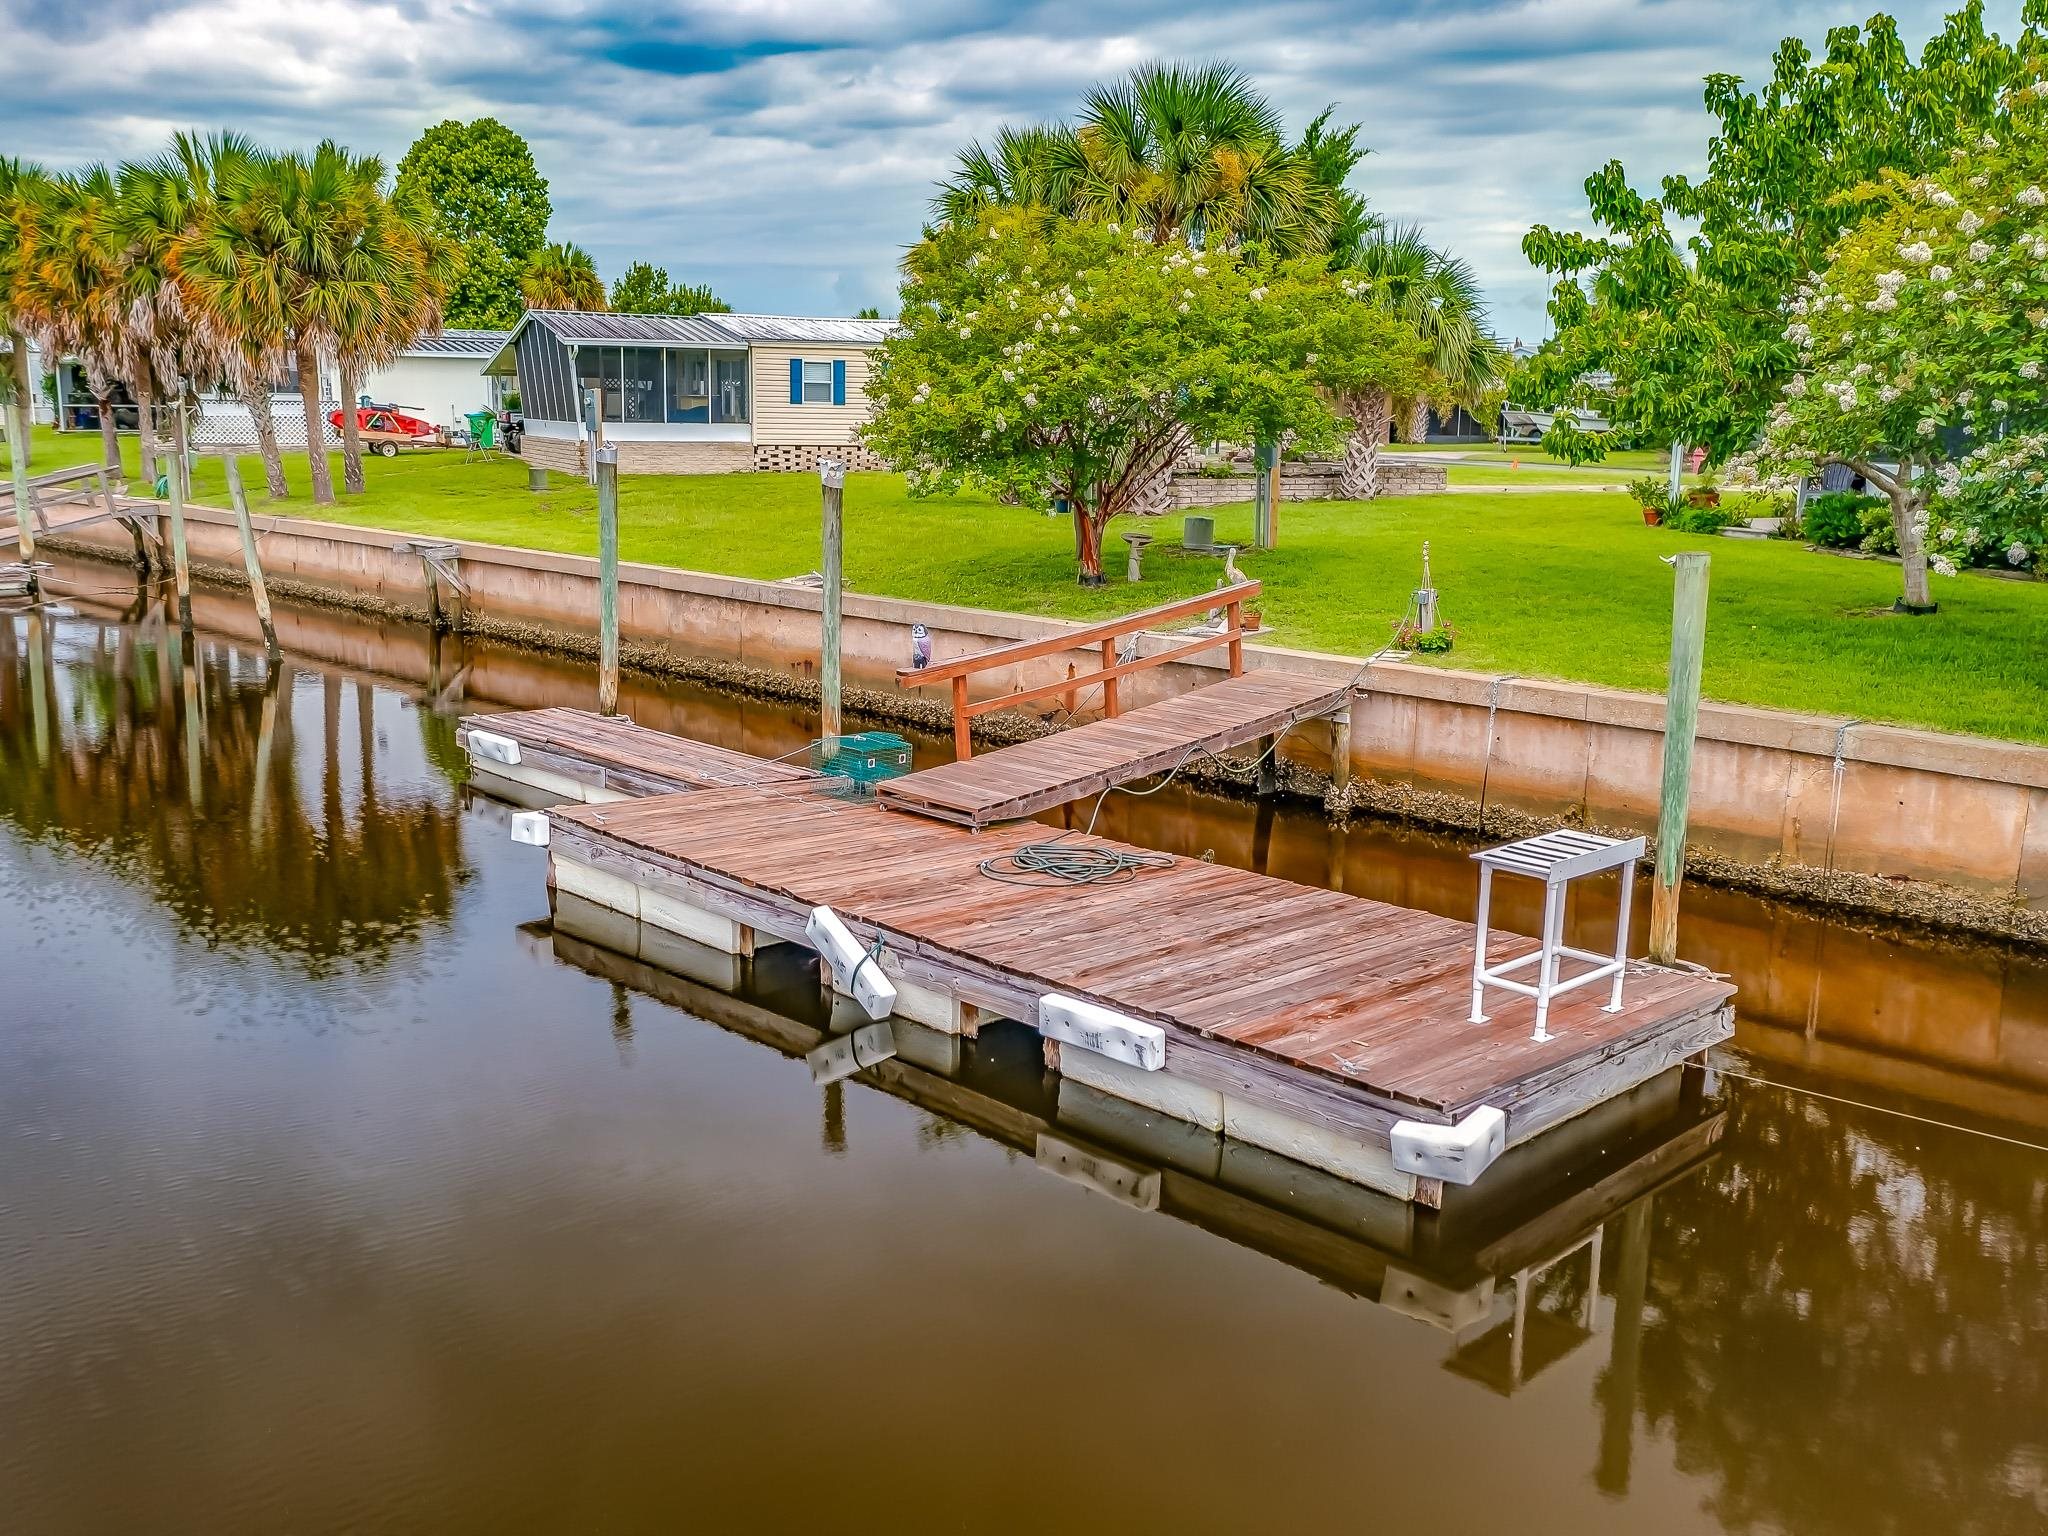 51 Janet Drive,SHELL POINT,Florida 32327,3 Bedrooms Bedrooms,2 BathroomsBathrooms,Manuf/mobile home,51 Janet Drive,361615